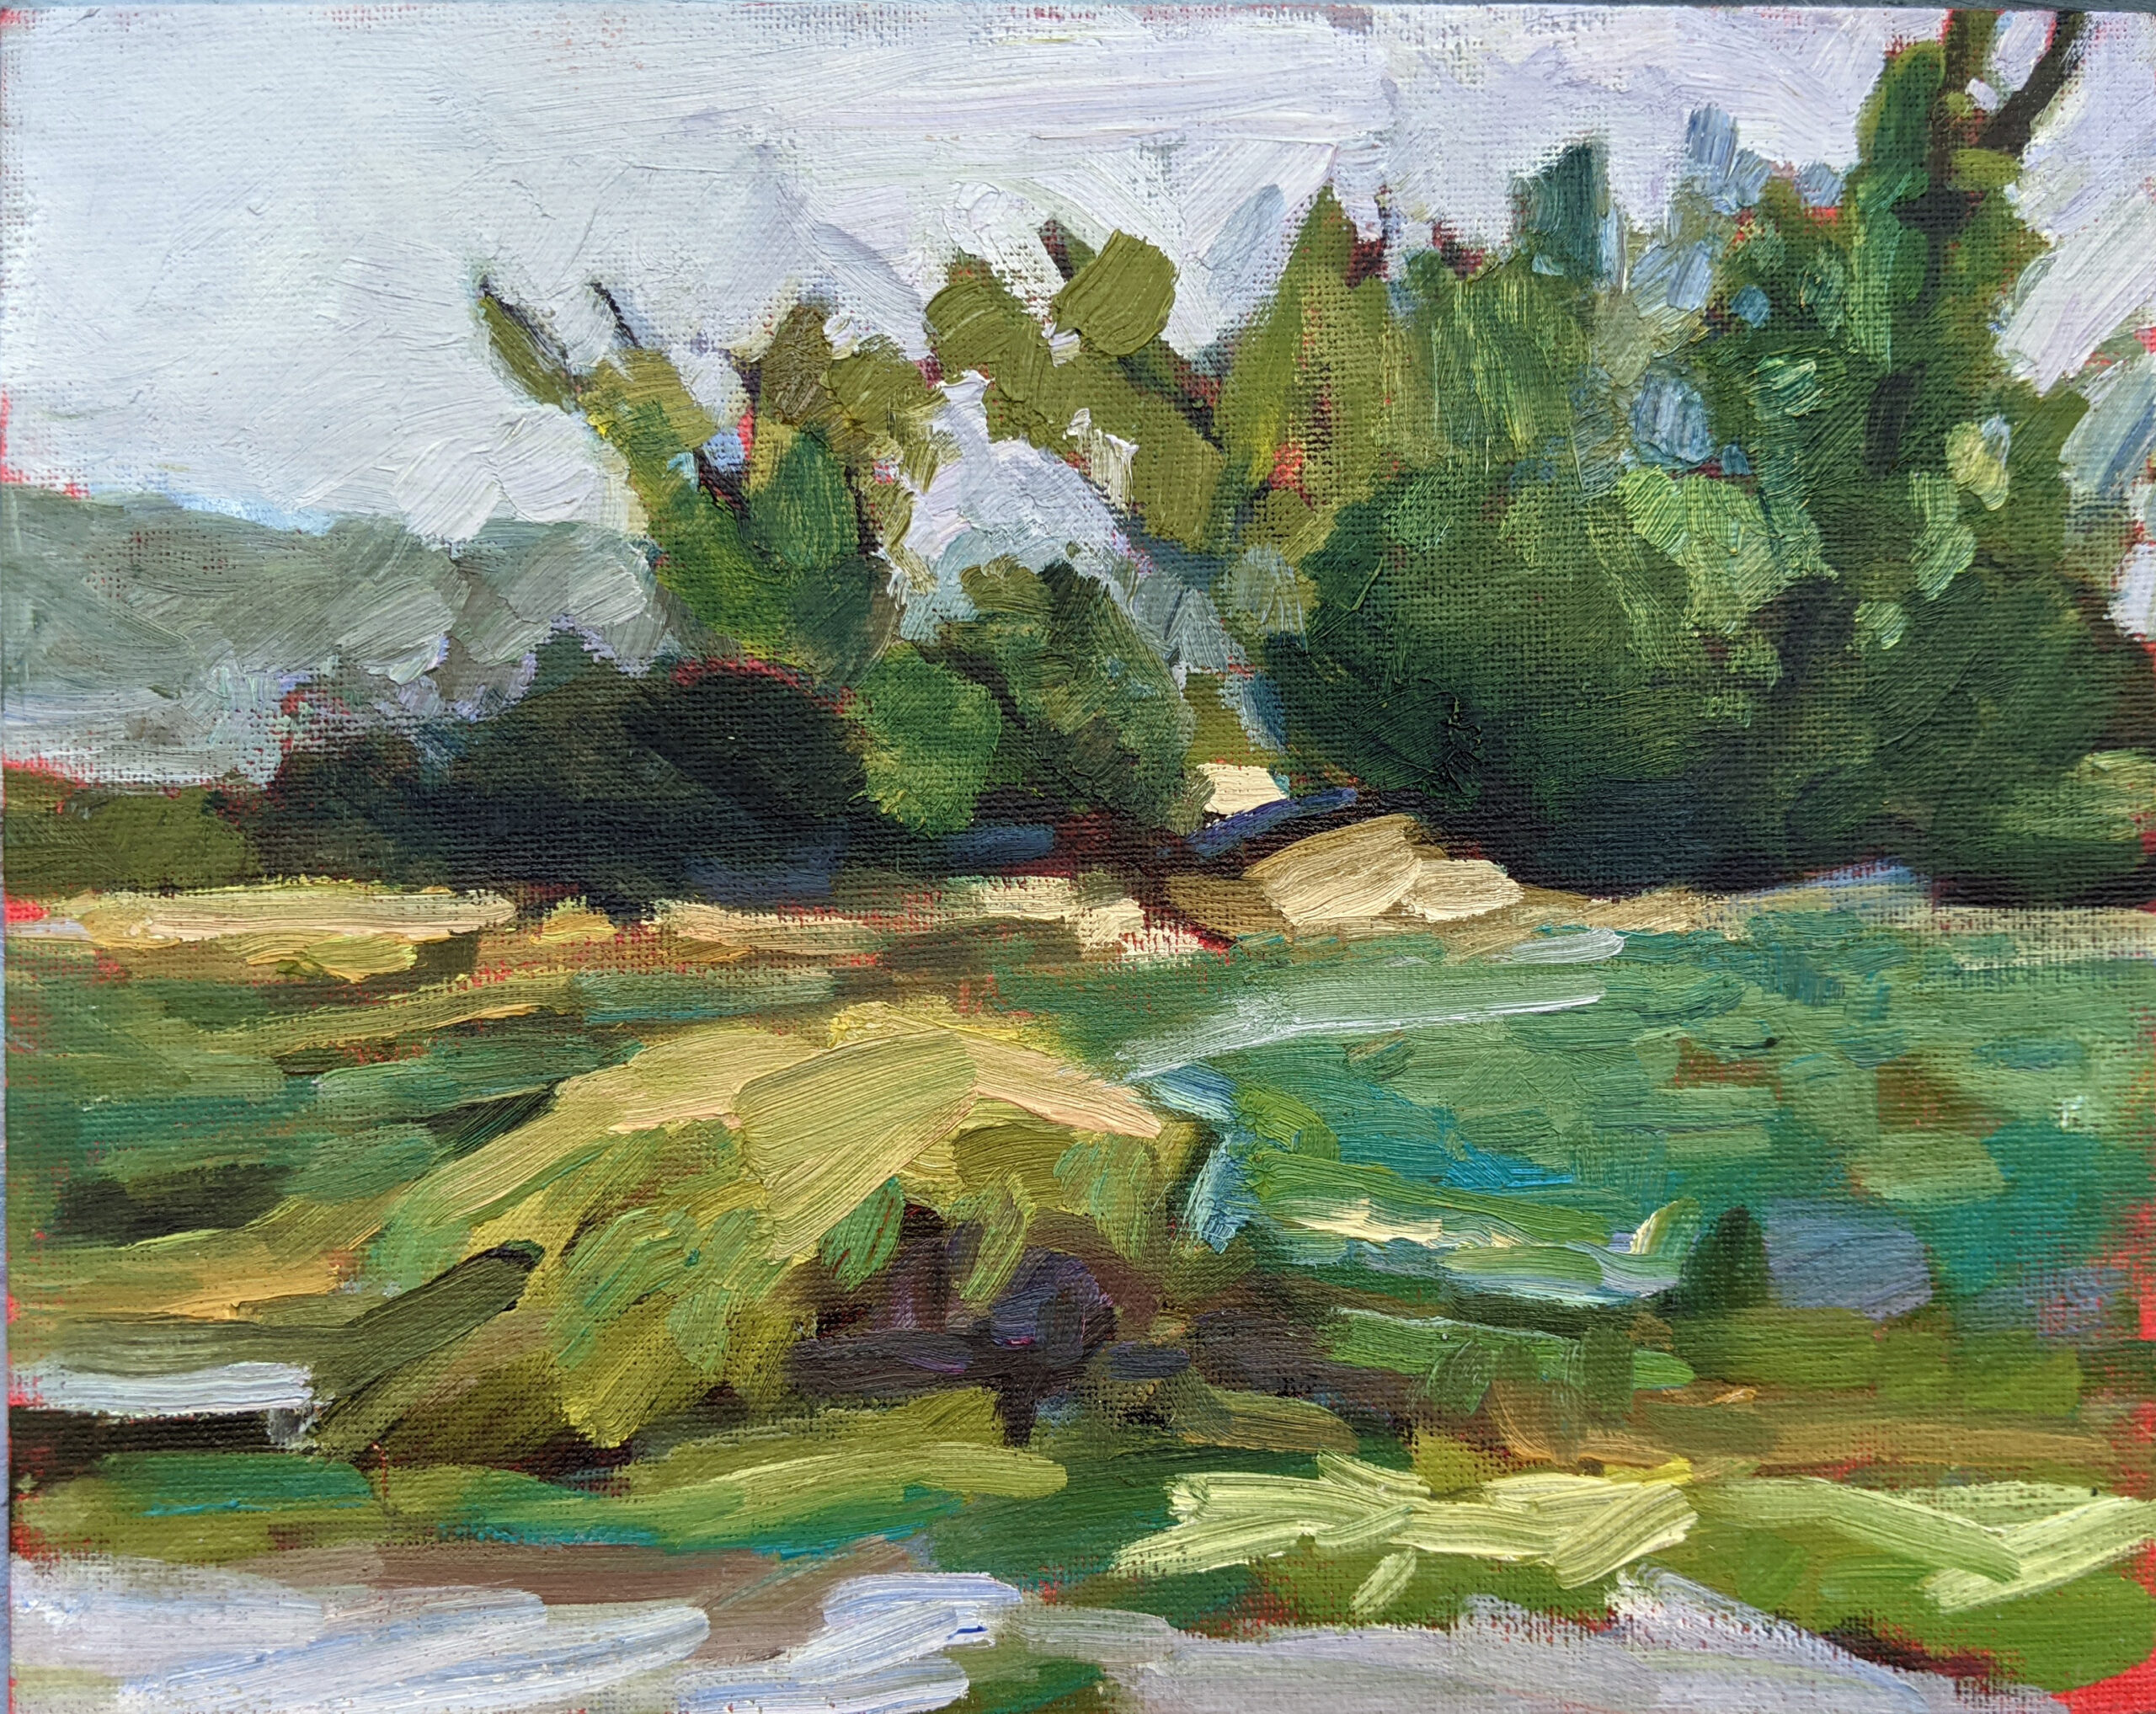 Spring Greens, 8X10, oil on archival canvasboard, $652 framed includes shipping and handling in continental US.